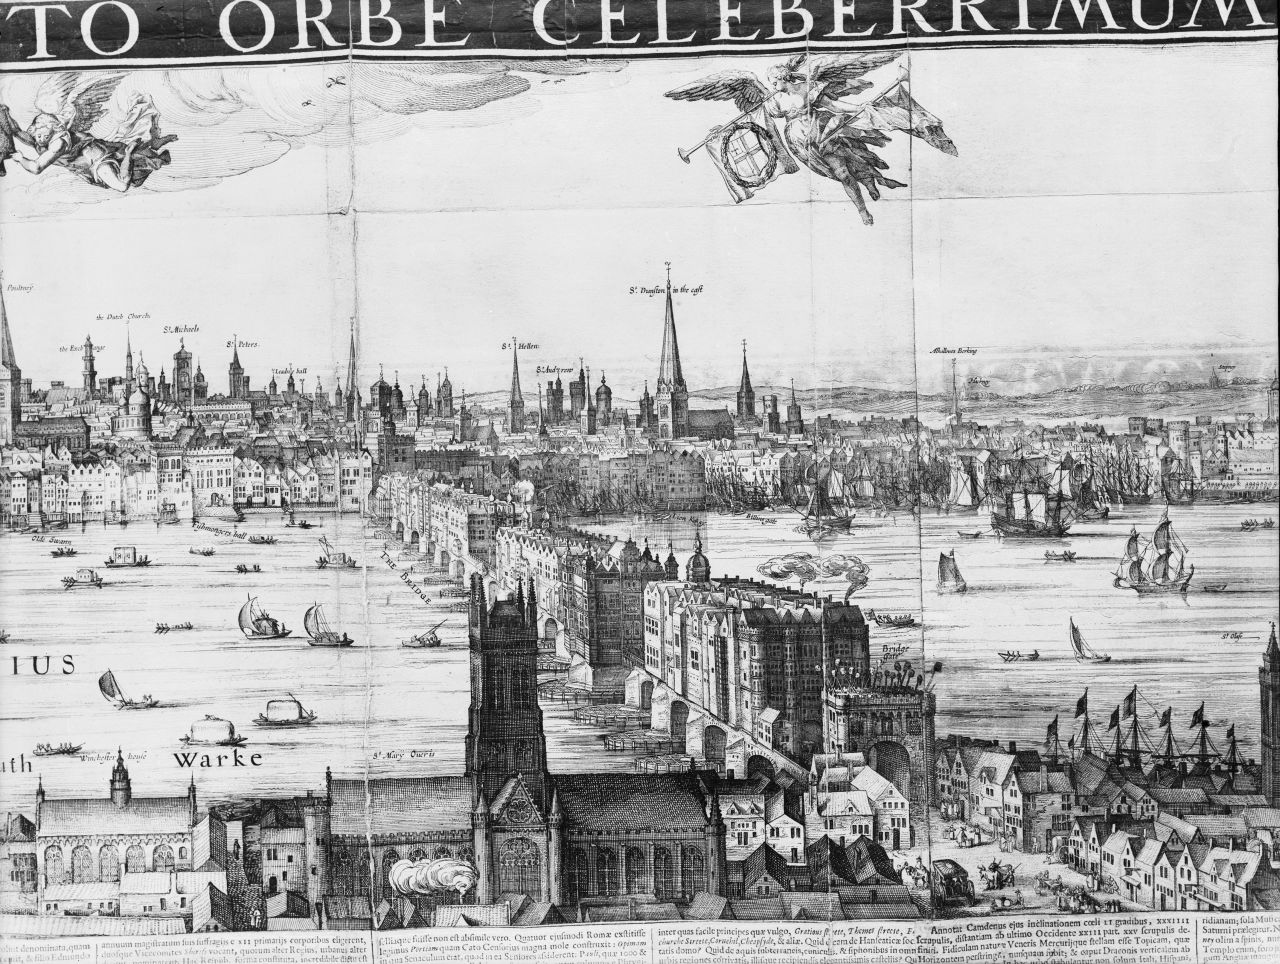 This detail from Vischer's Panorama of London (1616), shows the over-populated medieval London Bridge. 